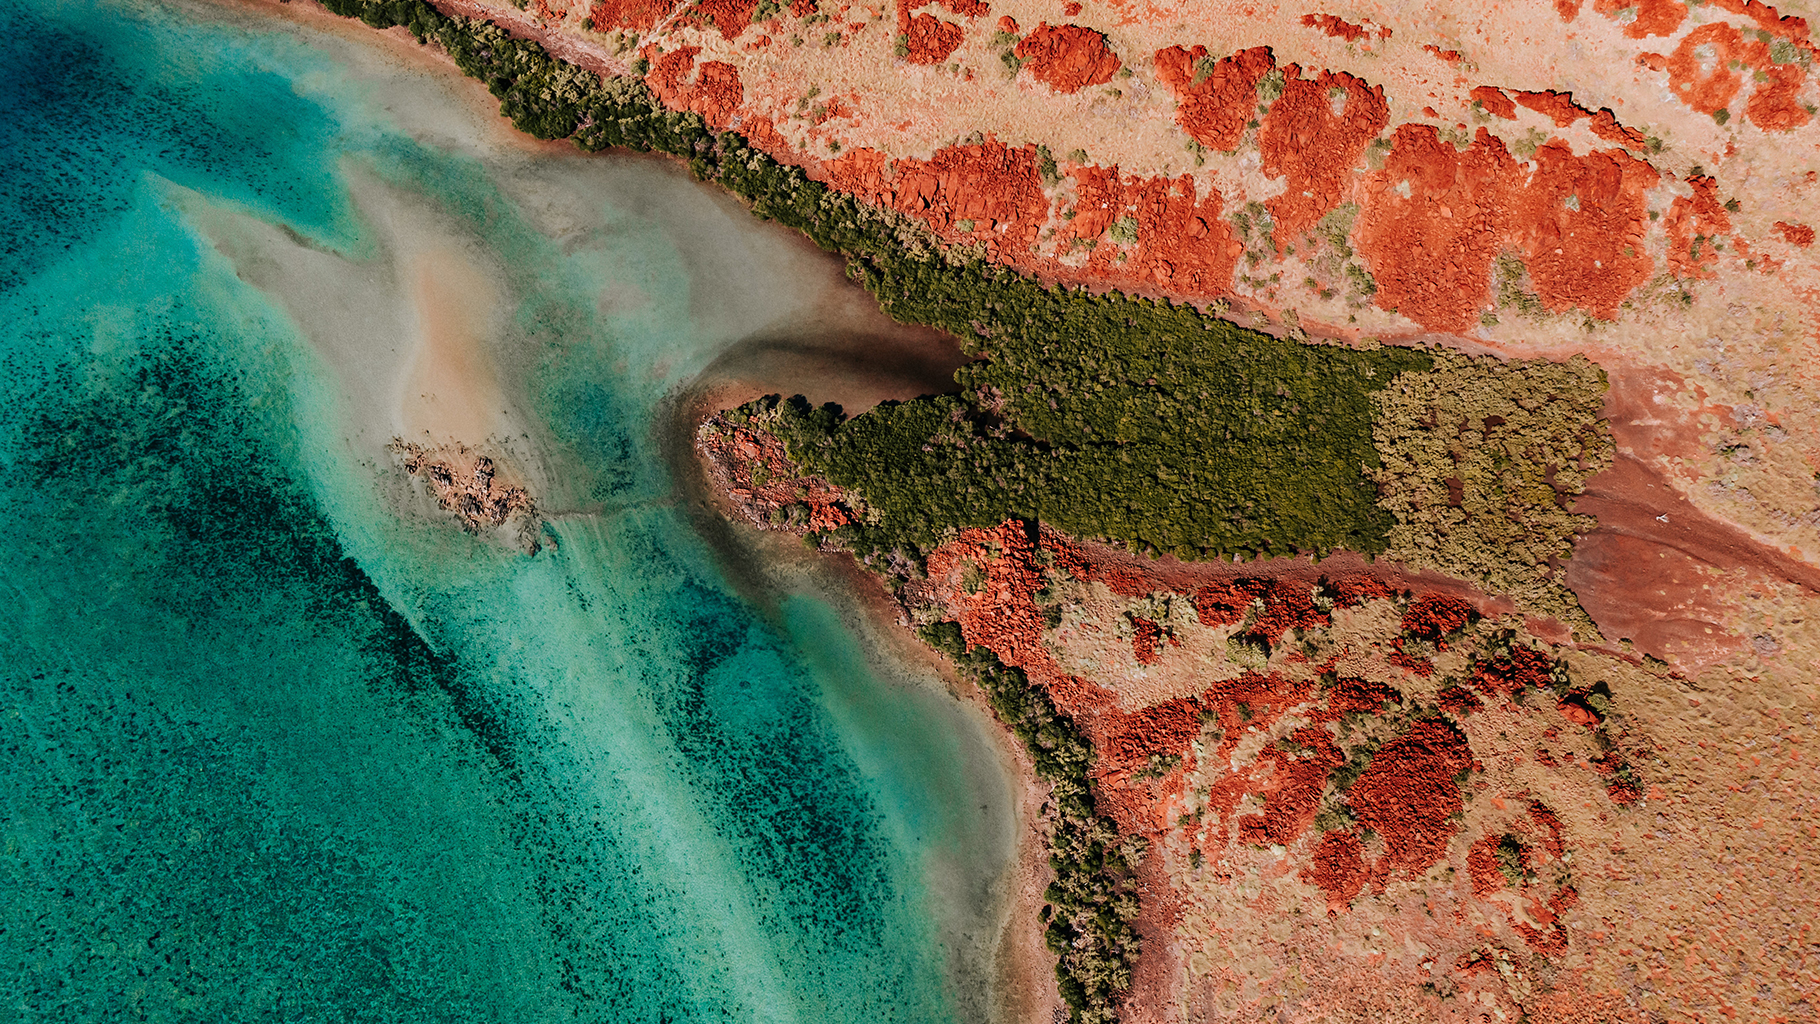 The Pilbara’s striking landscapes will benefit from new cutting-edge surveillance tools to assist in the monitoring and management of Aboriginal lands and waters.